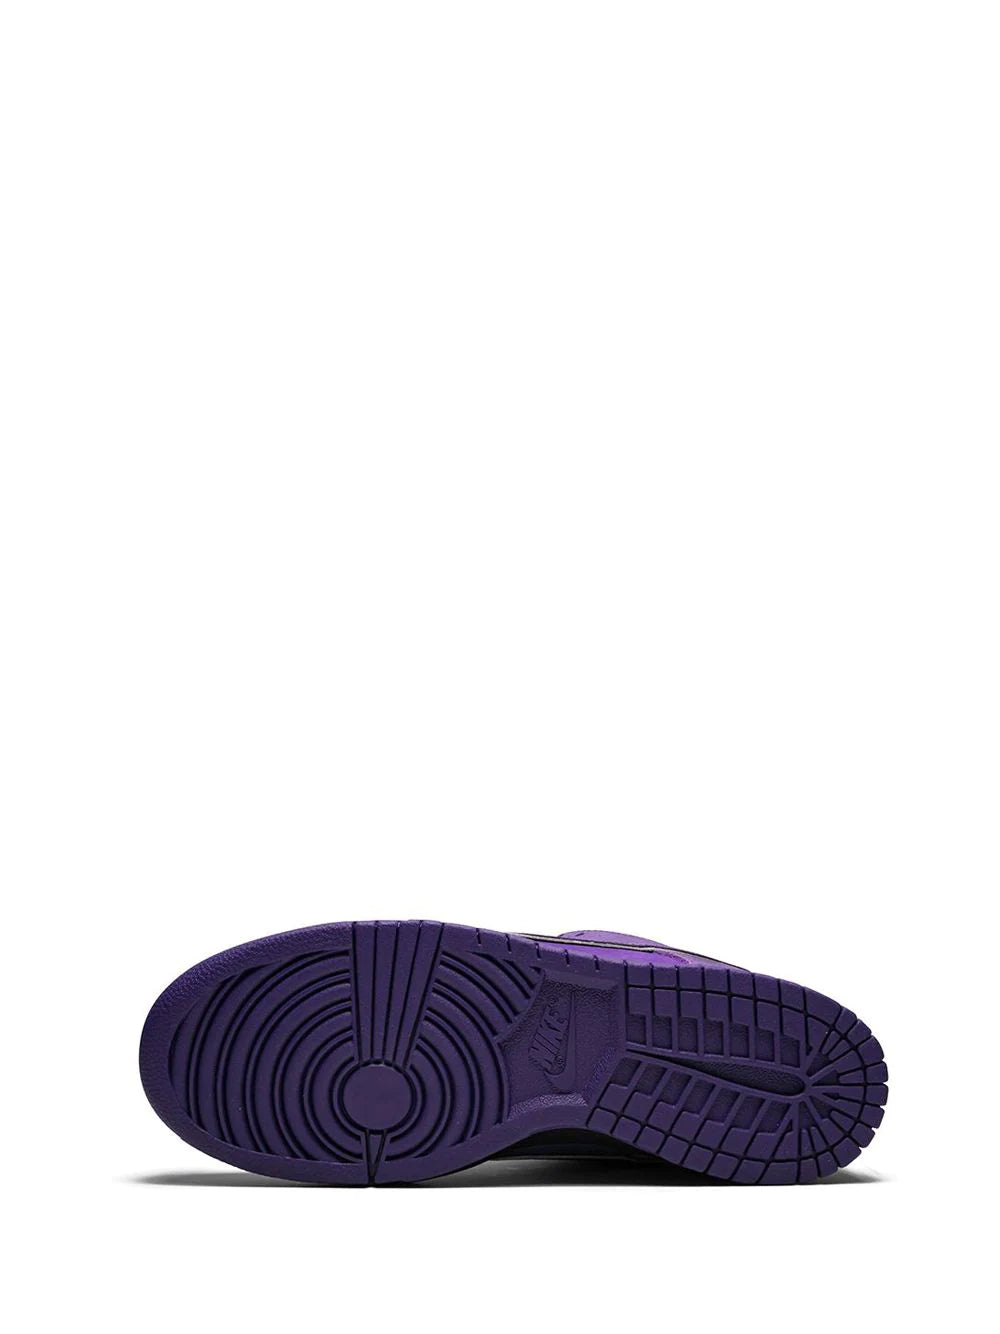 NIKE DUNK LOW - SB CONCEPTS PURPLE LOBSTER